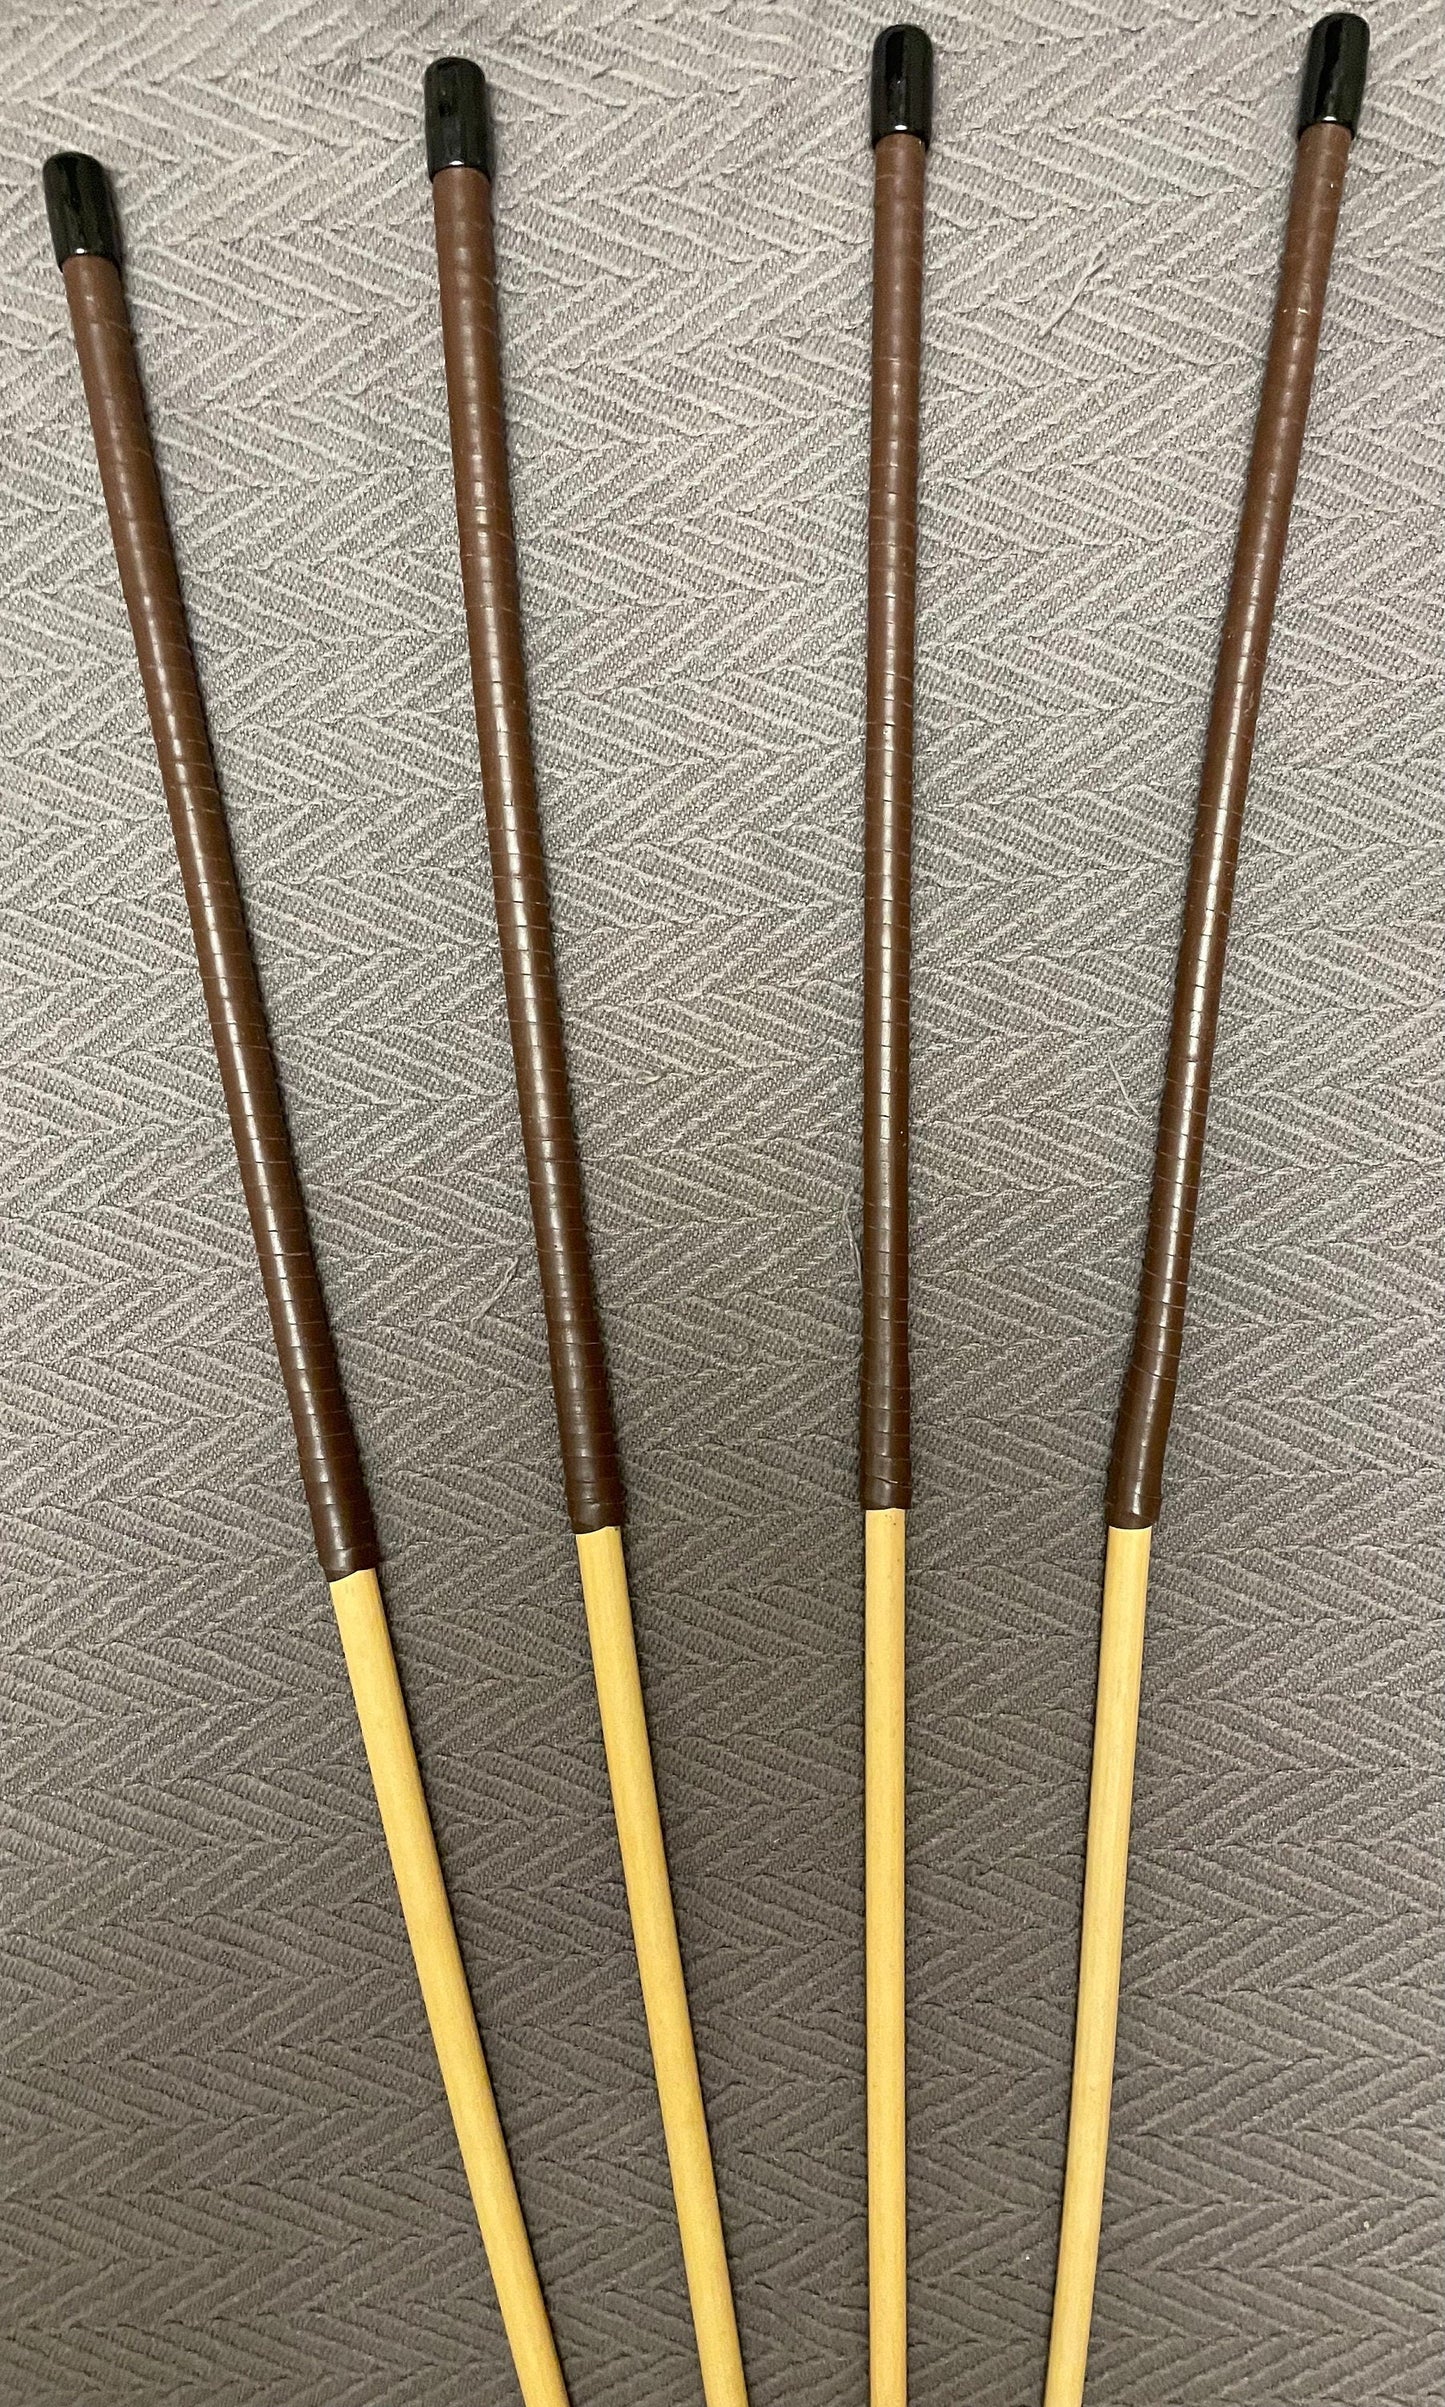 Knotless Dragon Canes / Ultimate Rattan Canes Set of 4 with Brandy Kangaroo Leather Handles 100 cms Length - Englishvice Canes